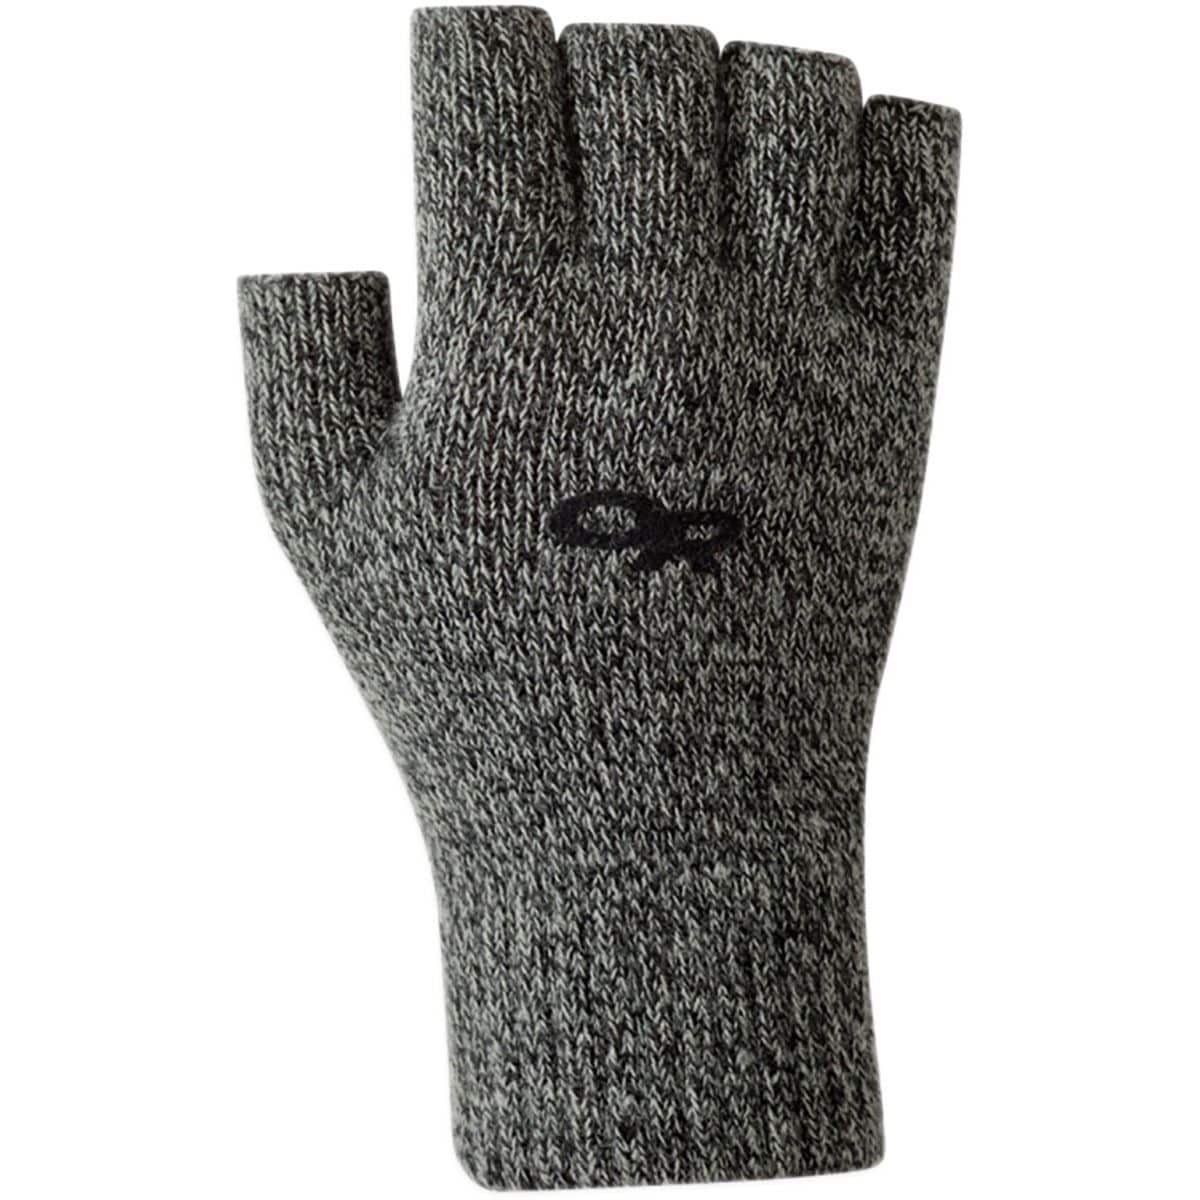 Outdoor Research Fairbanks Fingerless Gloves, Size: Small/Medium, Charcoal